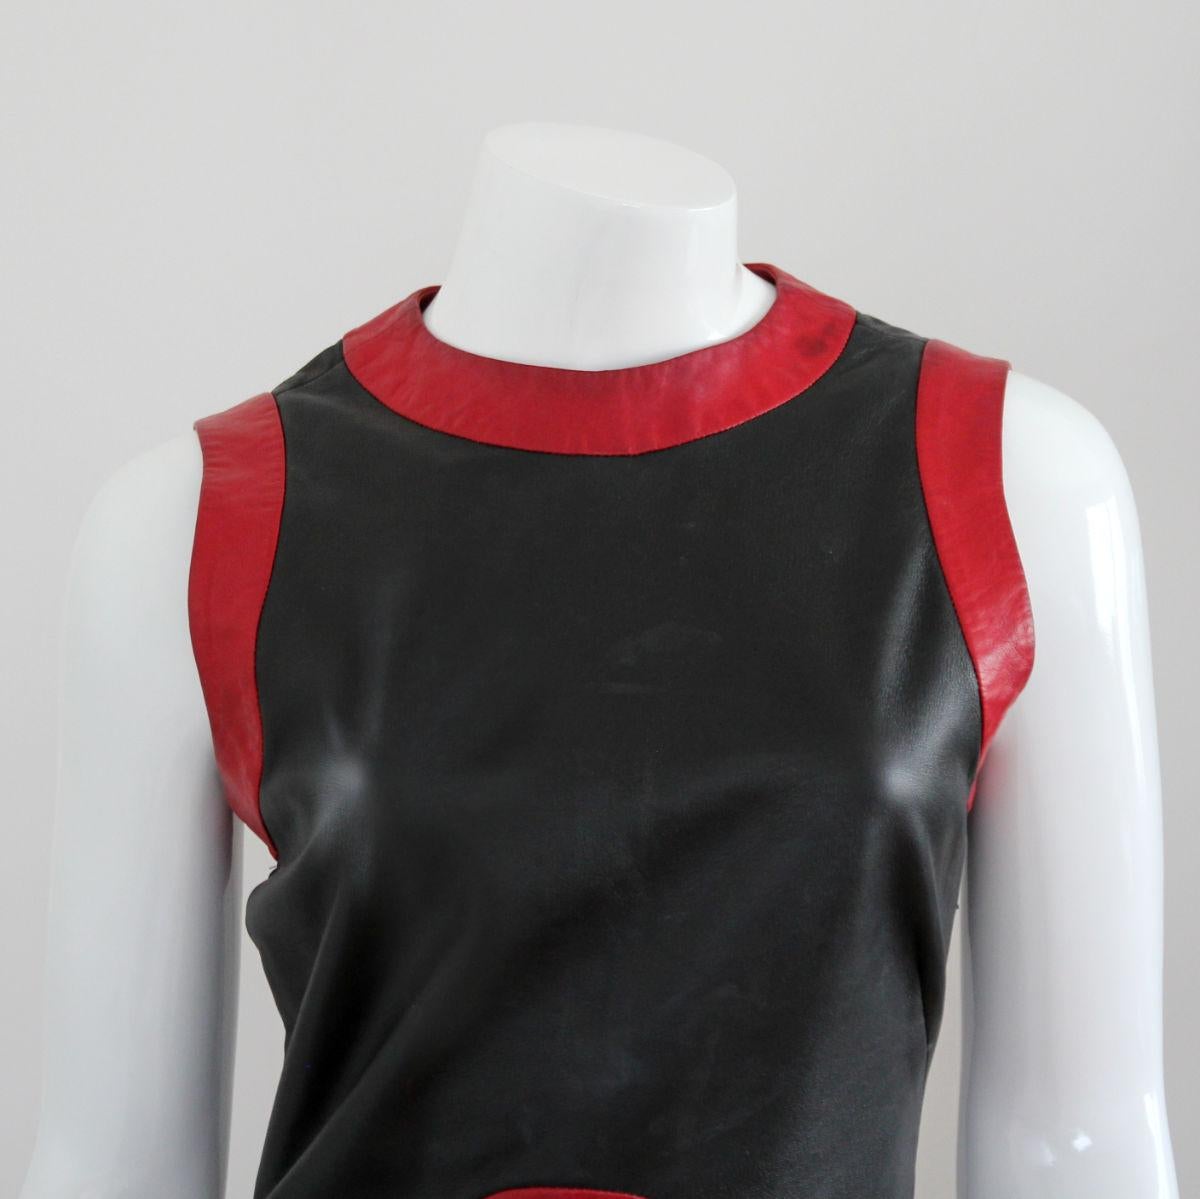 ALEXANDER MCQUEEN 2000 Black & Red Arch Cutout Leather Tank Top 